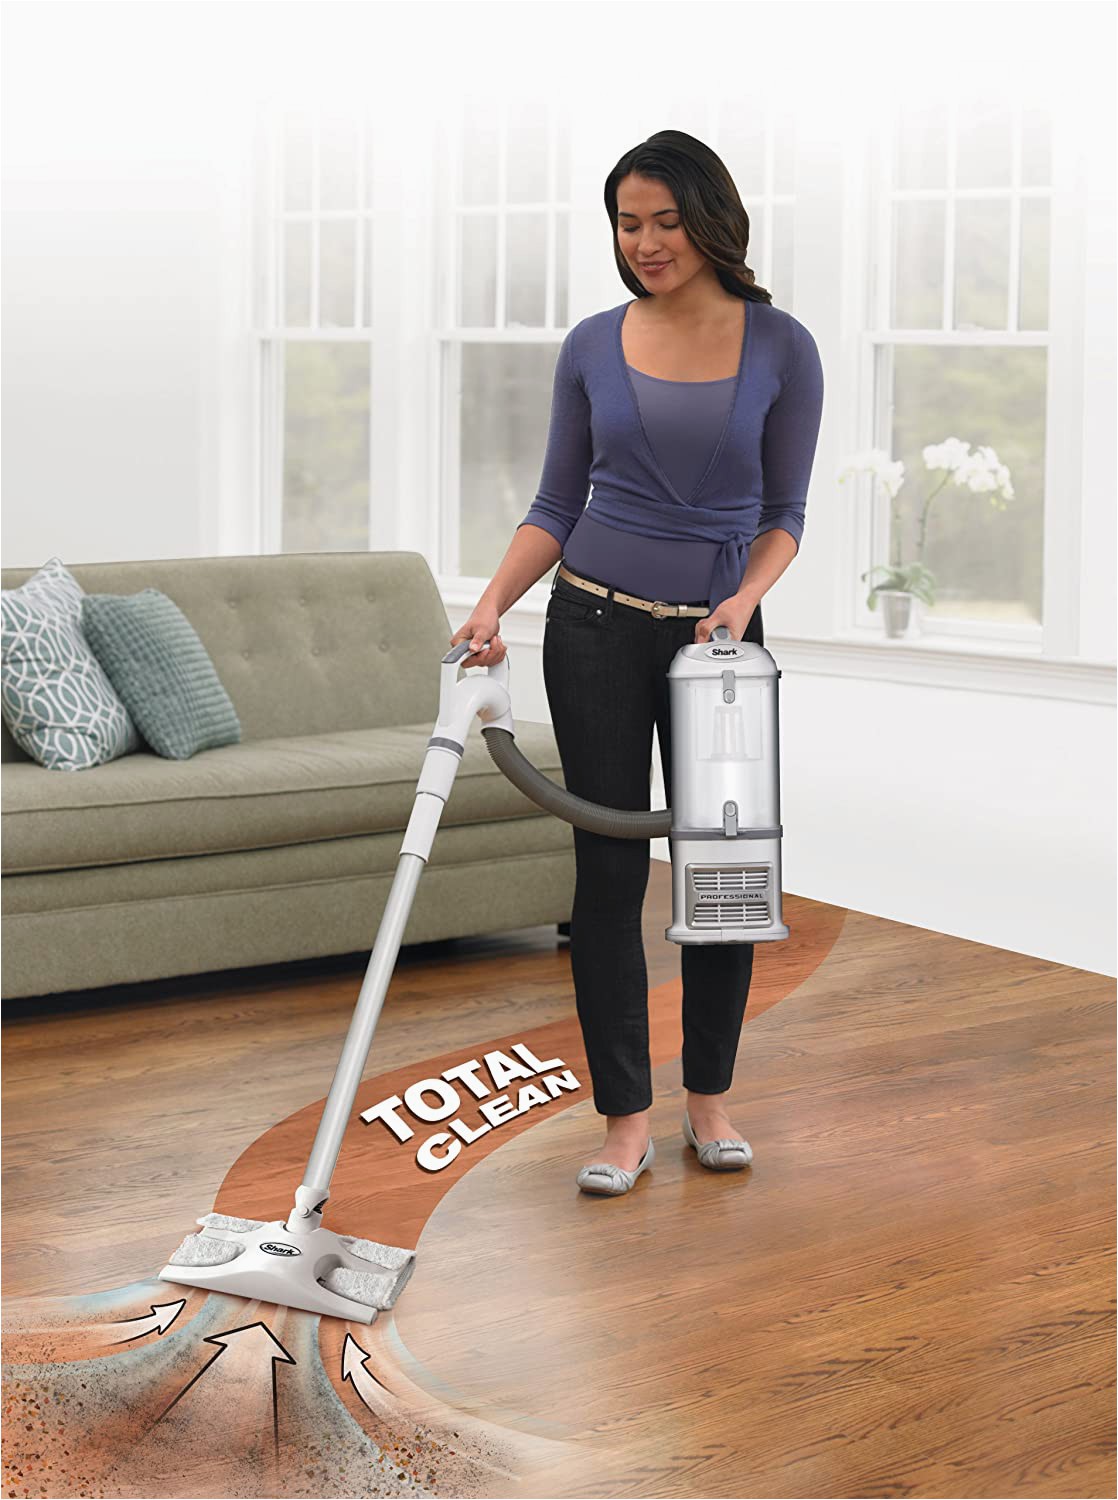 Best Vacuum for Tile Floors and area Rugs Best Vacuum for Tile Floors 2018 top Vacuum Cleaner Guide